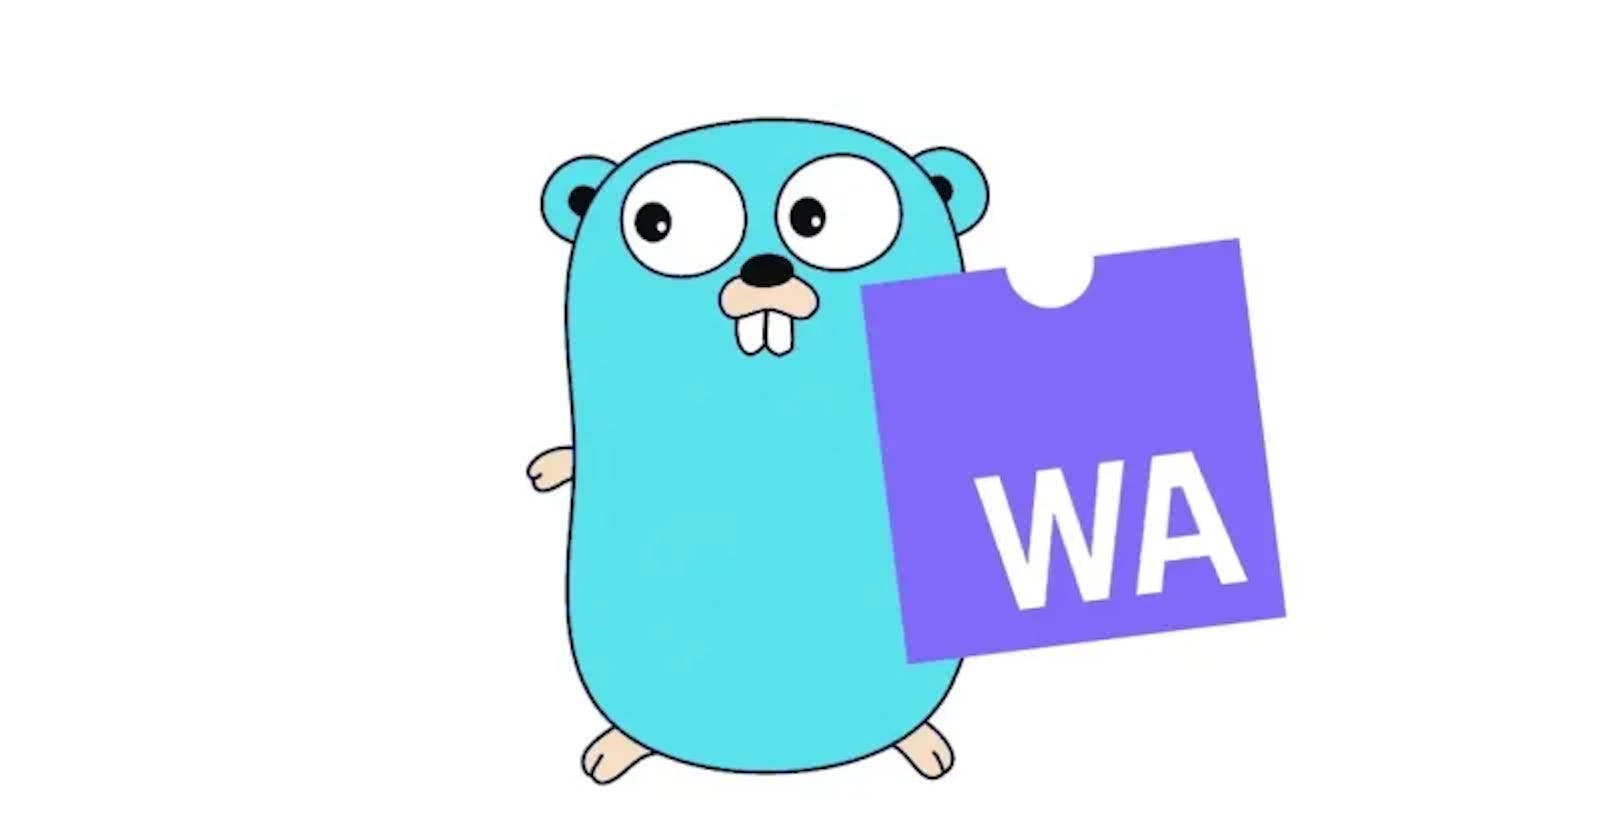 Golang & WebAssembly - build a Web app with them